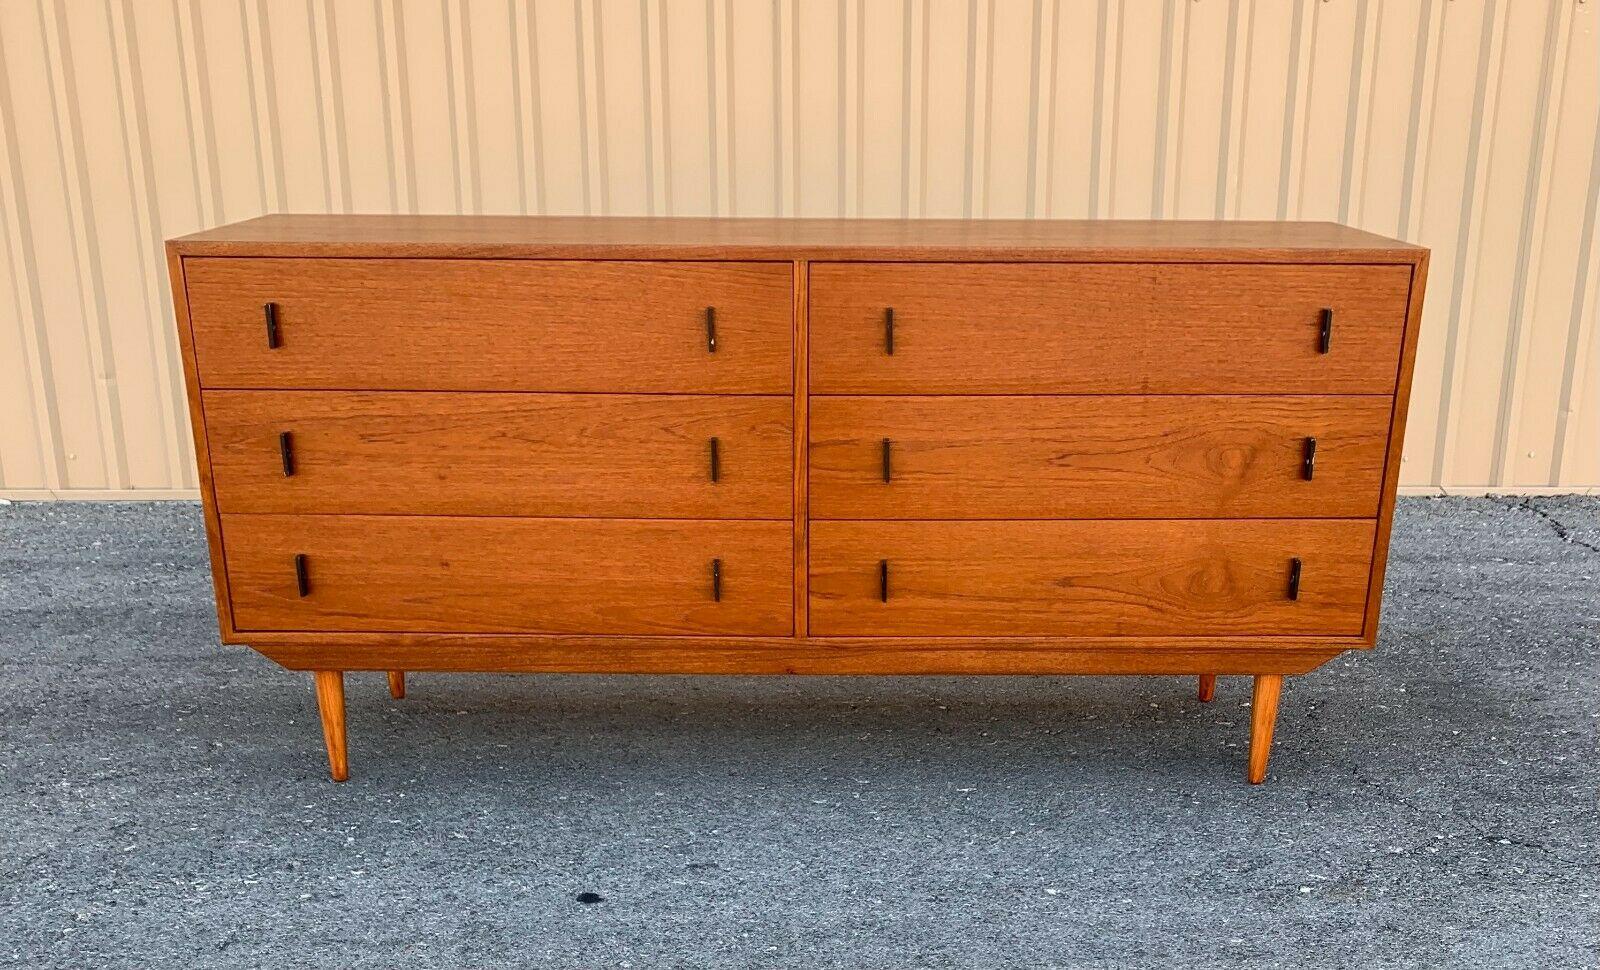 This stunning Danish modern teak dresser features 6 hefty drawers ensuring plenty of room for storage. The clean lines, rich teak finish, and black sleek drawer pulls show quality craftsmanship. This Canadian made midcentury dresser makes the